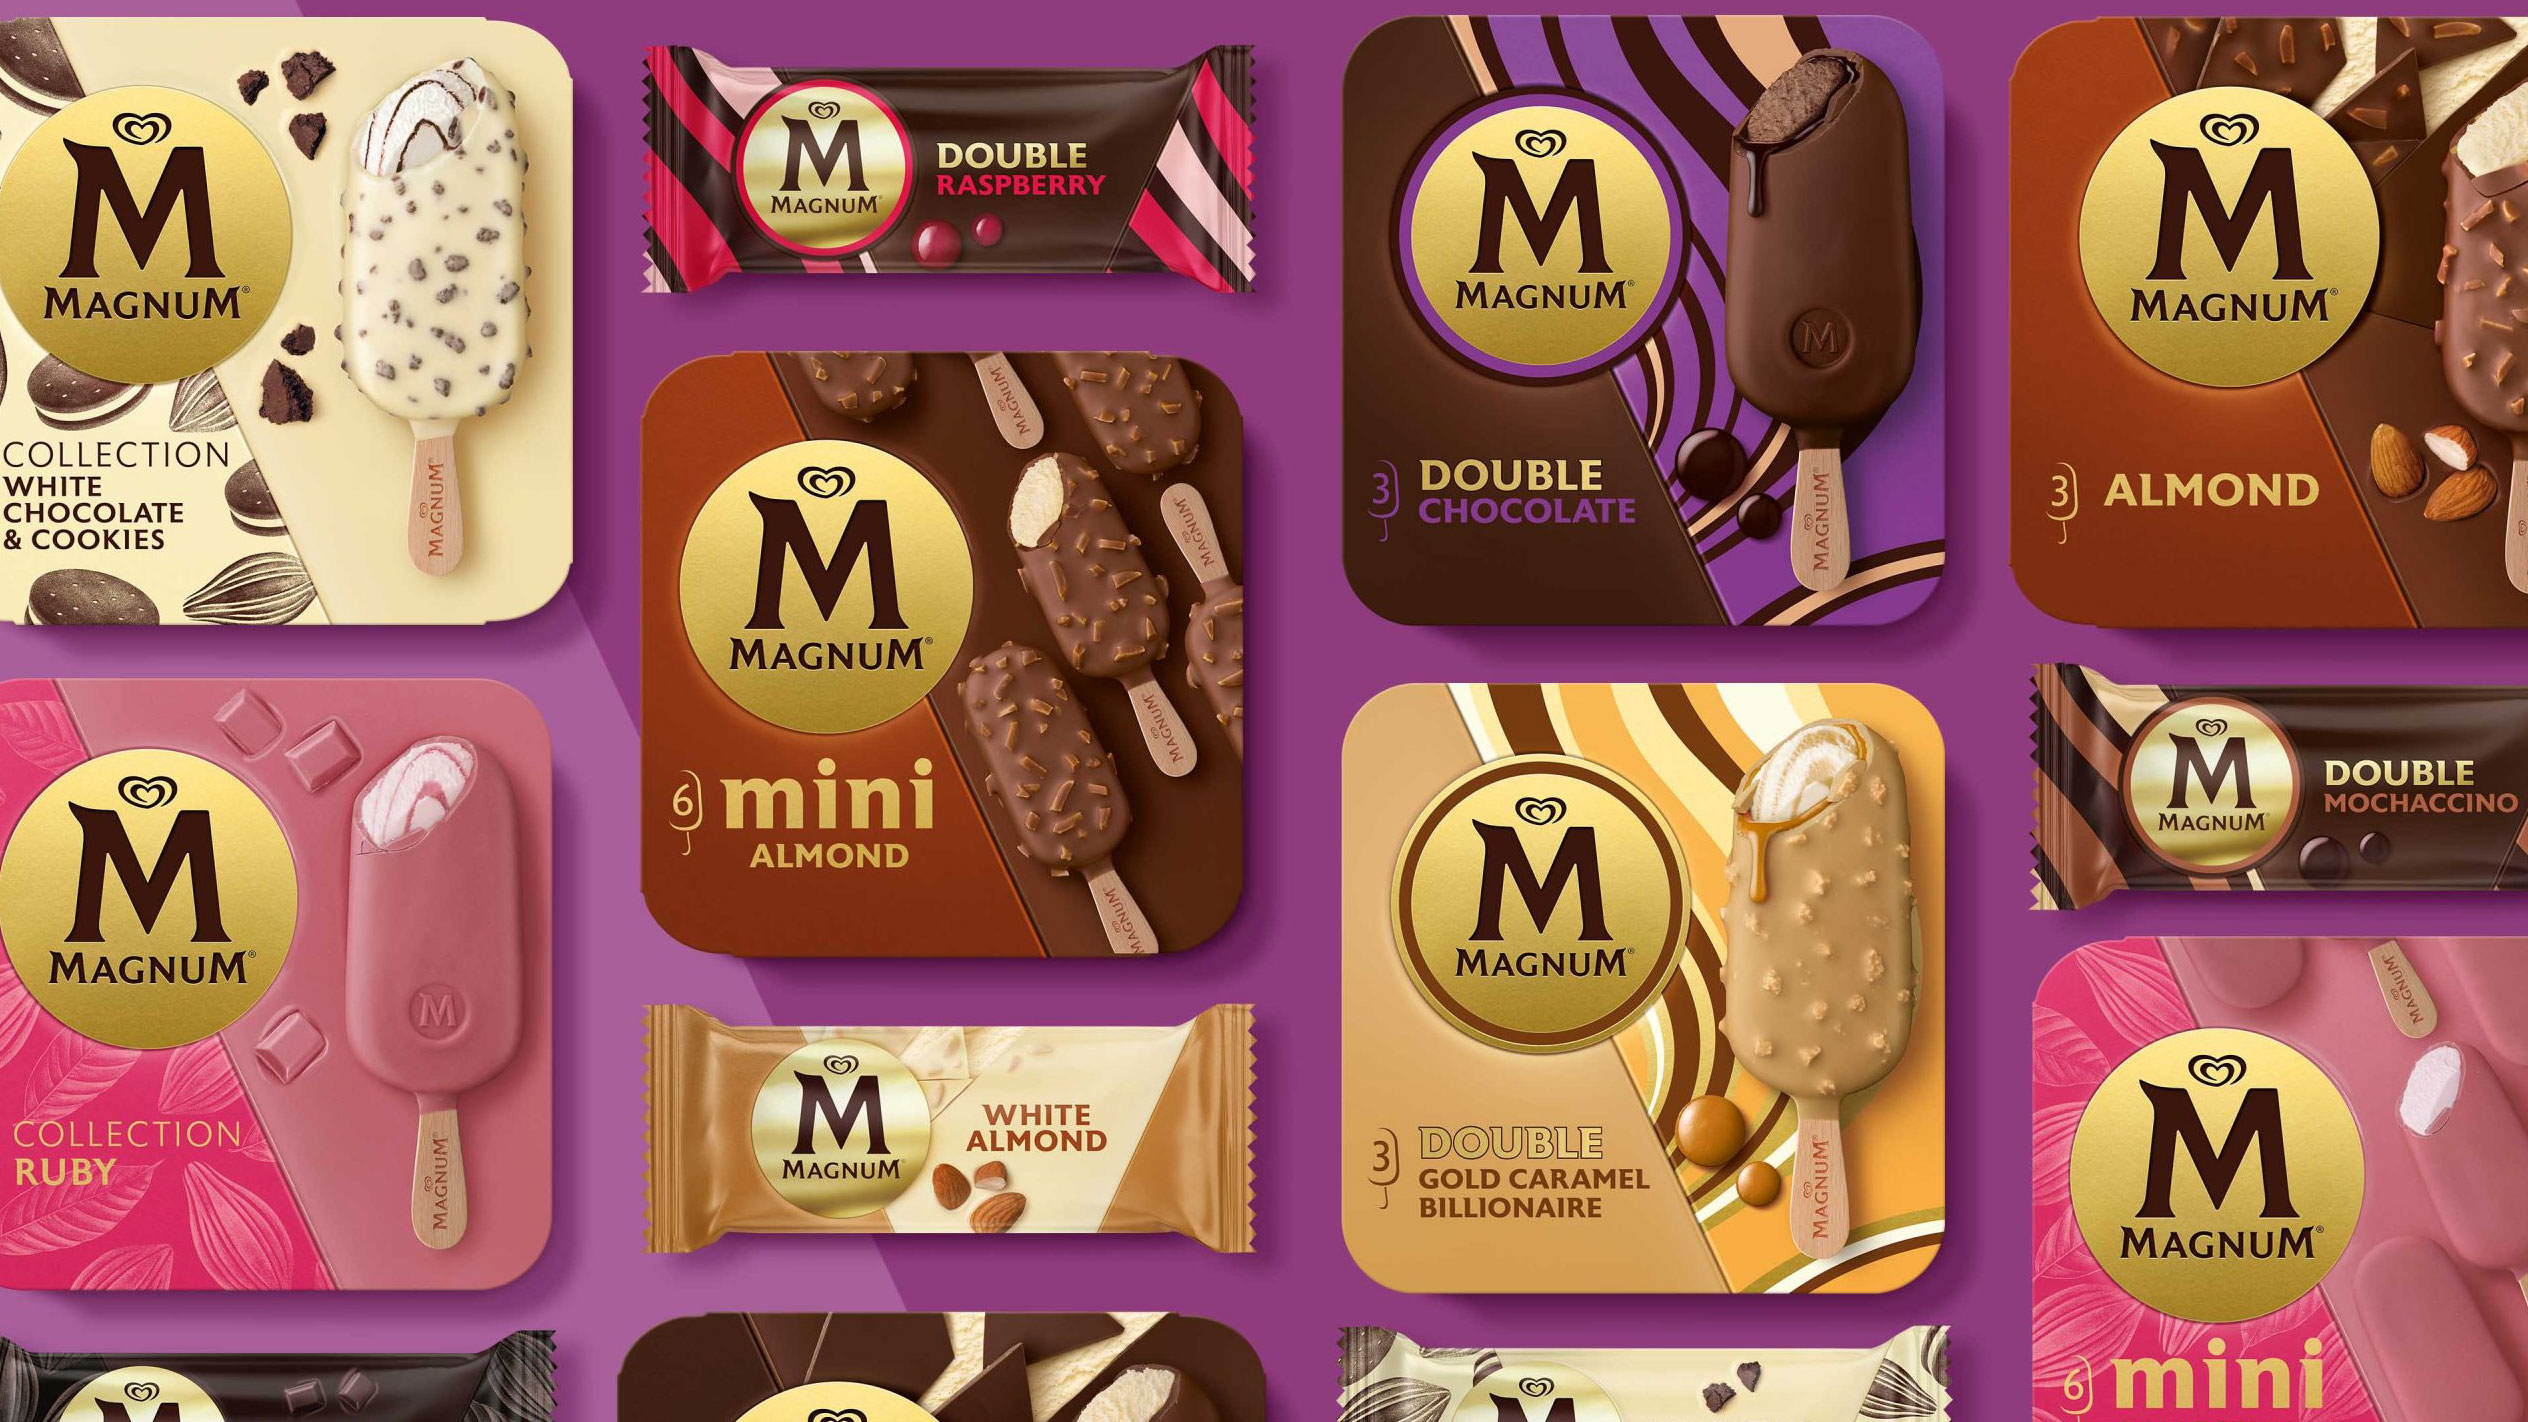 Magnum rebrand plays with pleasure (and does not play it cool